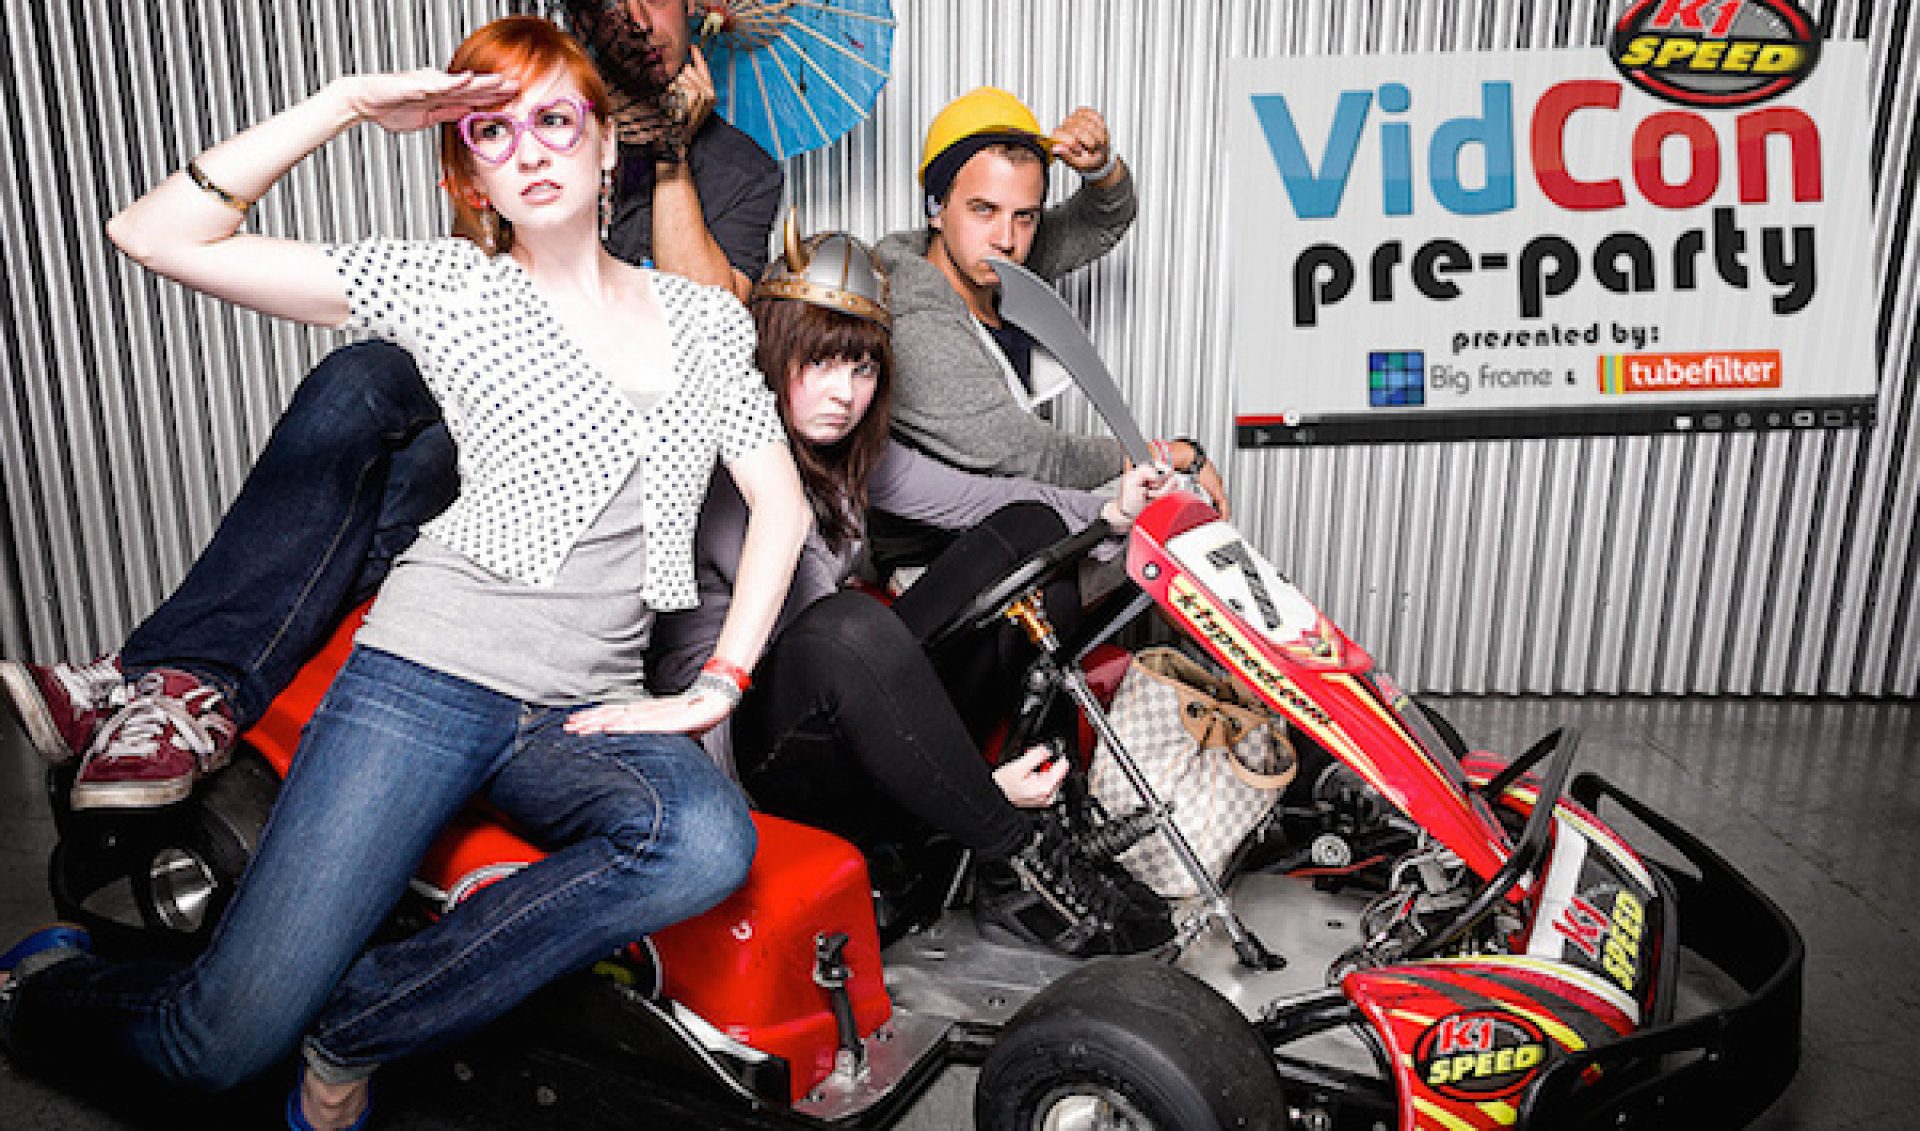 Join Us At Tubefilter’s 4th Annual VidCon Pre-Party on Wednesday